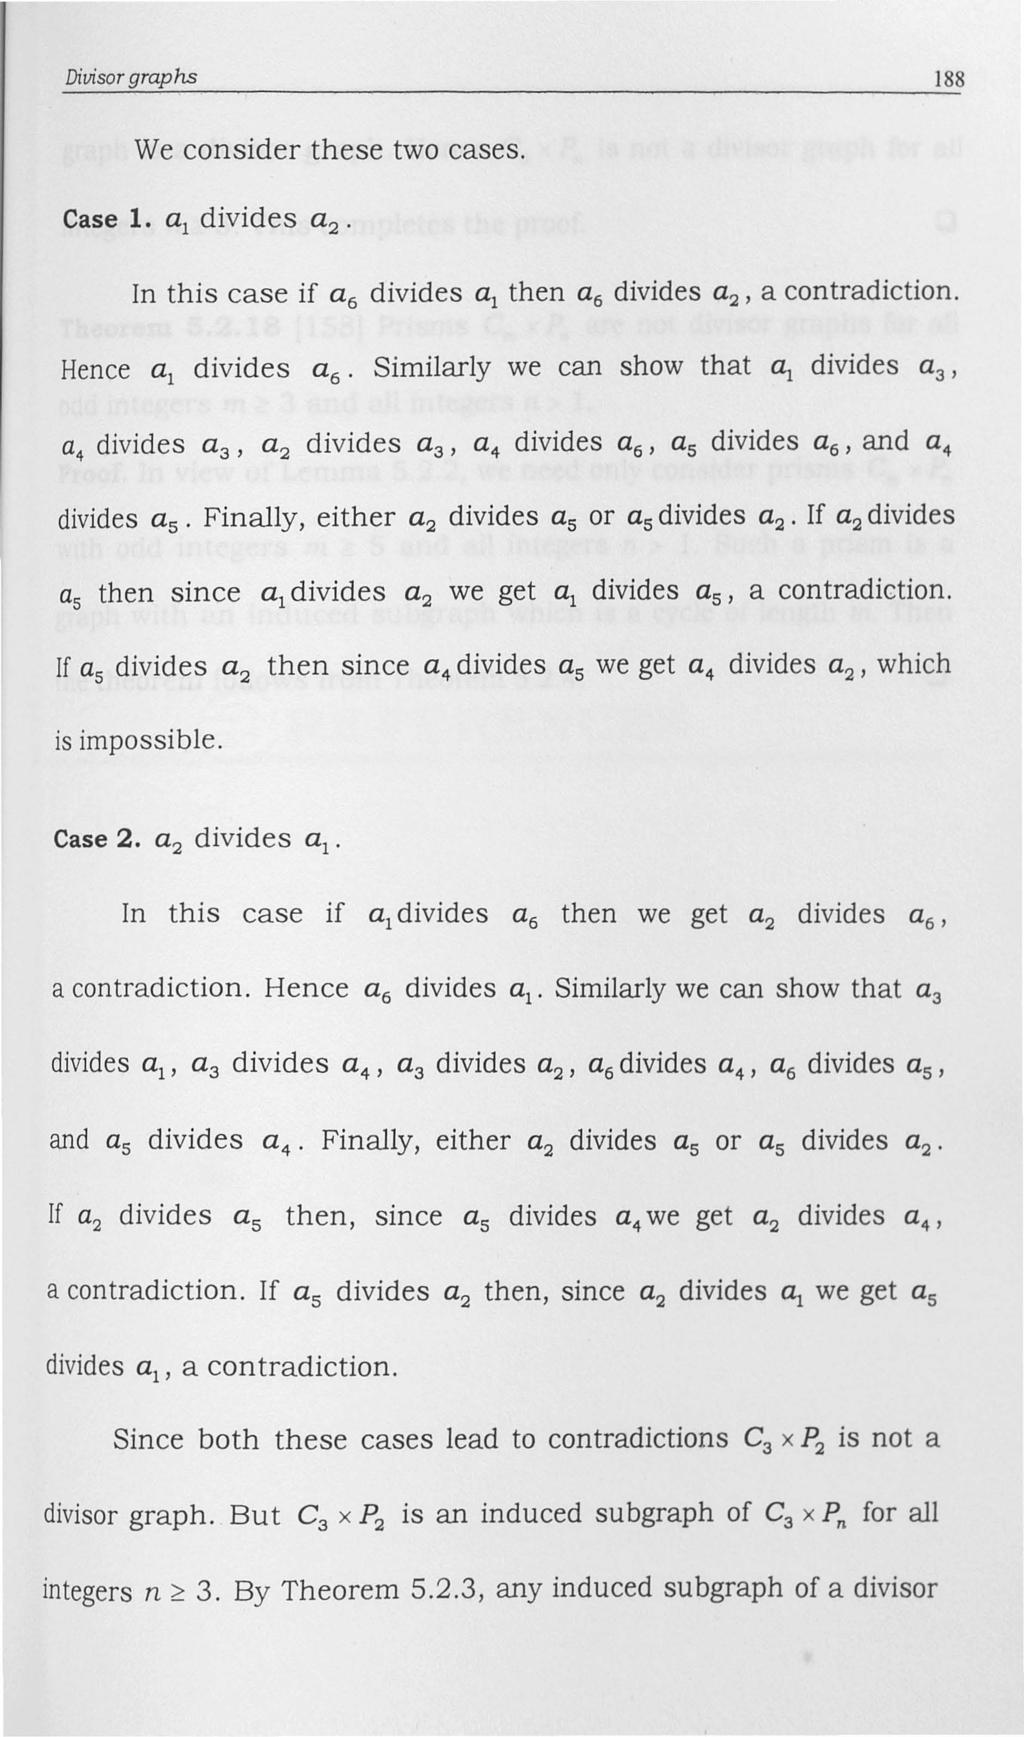 Divisor graphs 188 We consider these two cases. Case 1. a 1 divides a 2 In this case if a 6 divides a 1 then a 6 divides a 2, a contradiction.